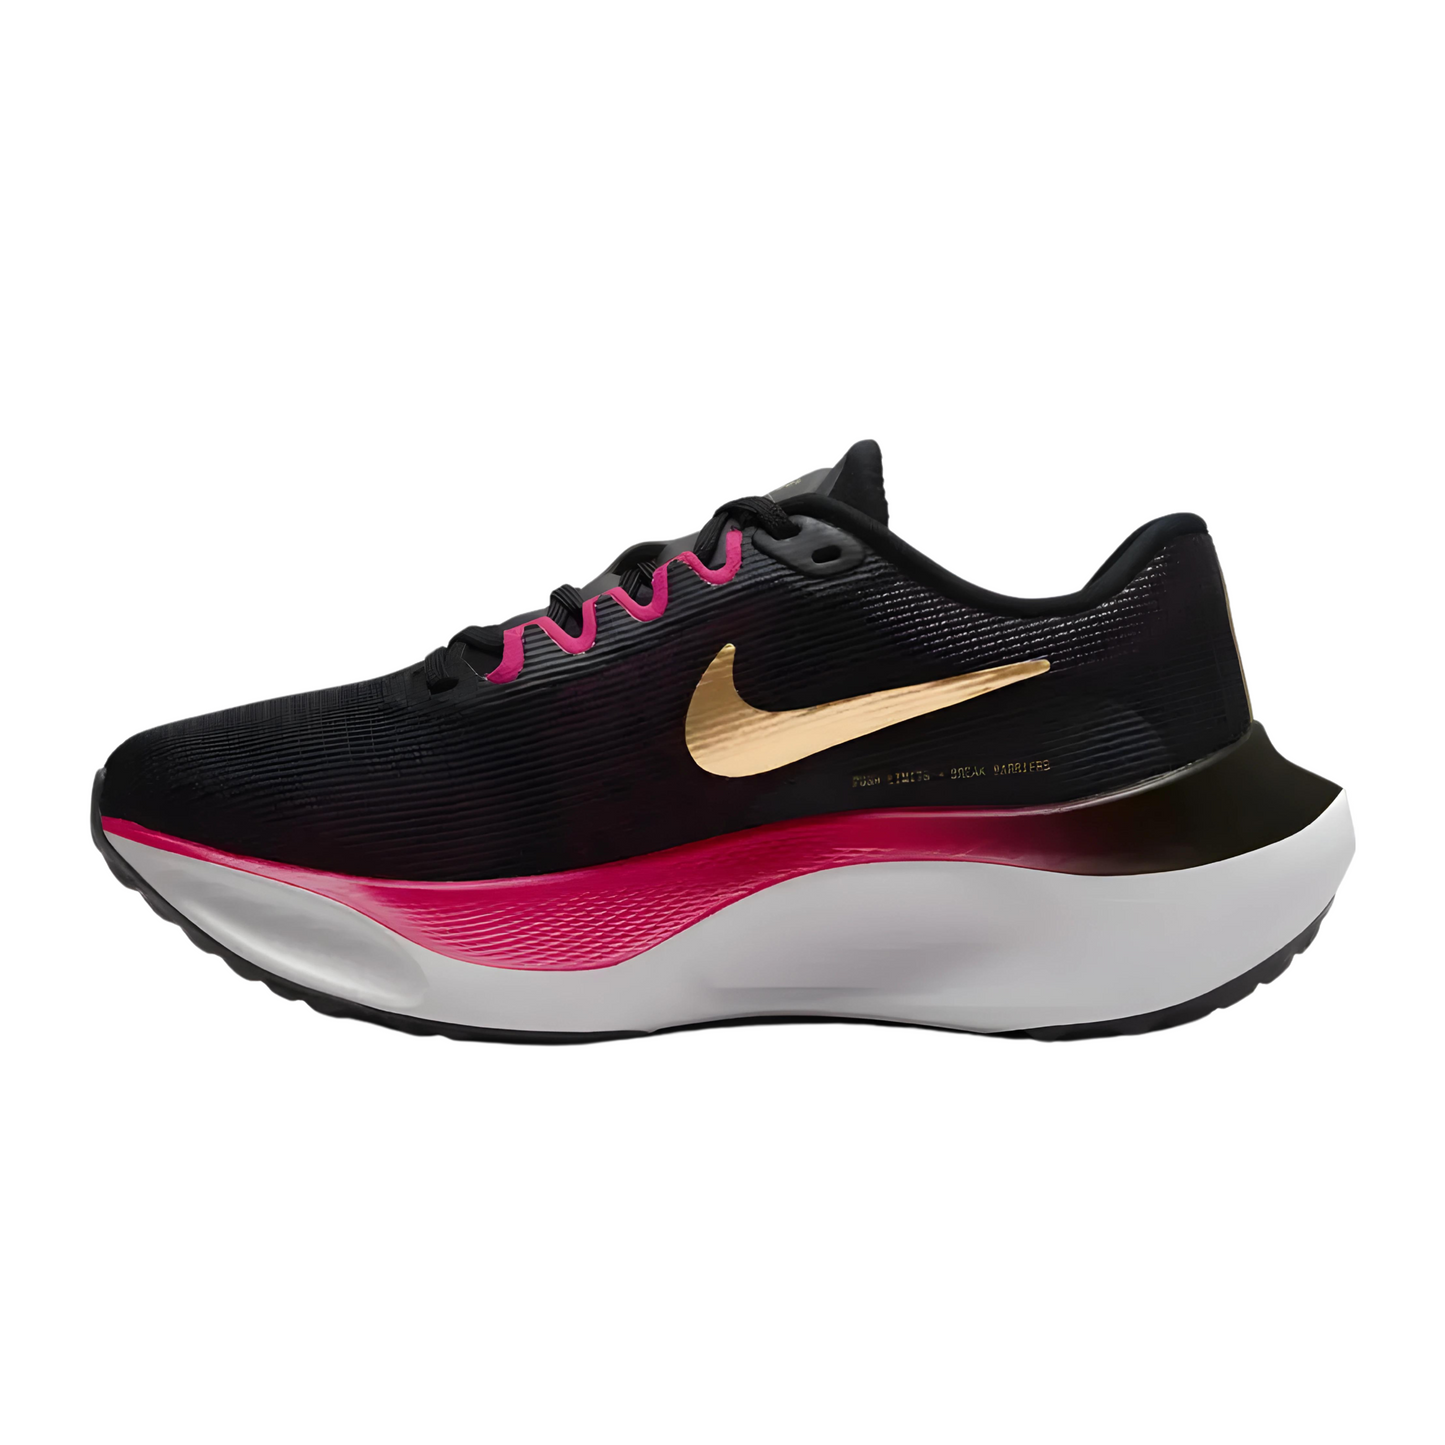 Nike, Zoom Fly 5 Running Shoes